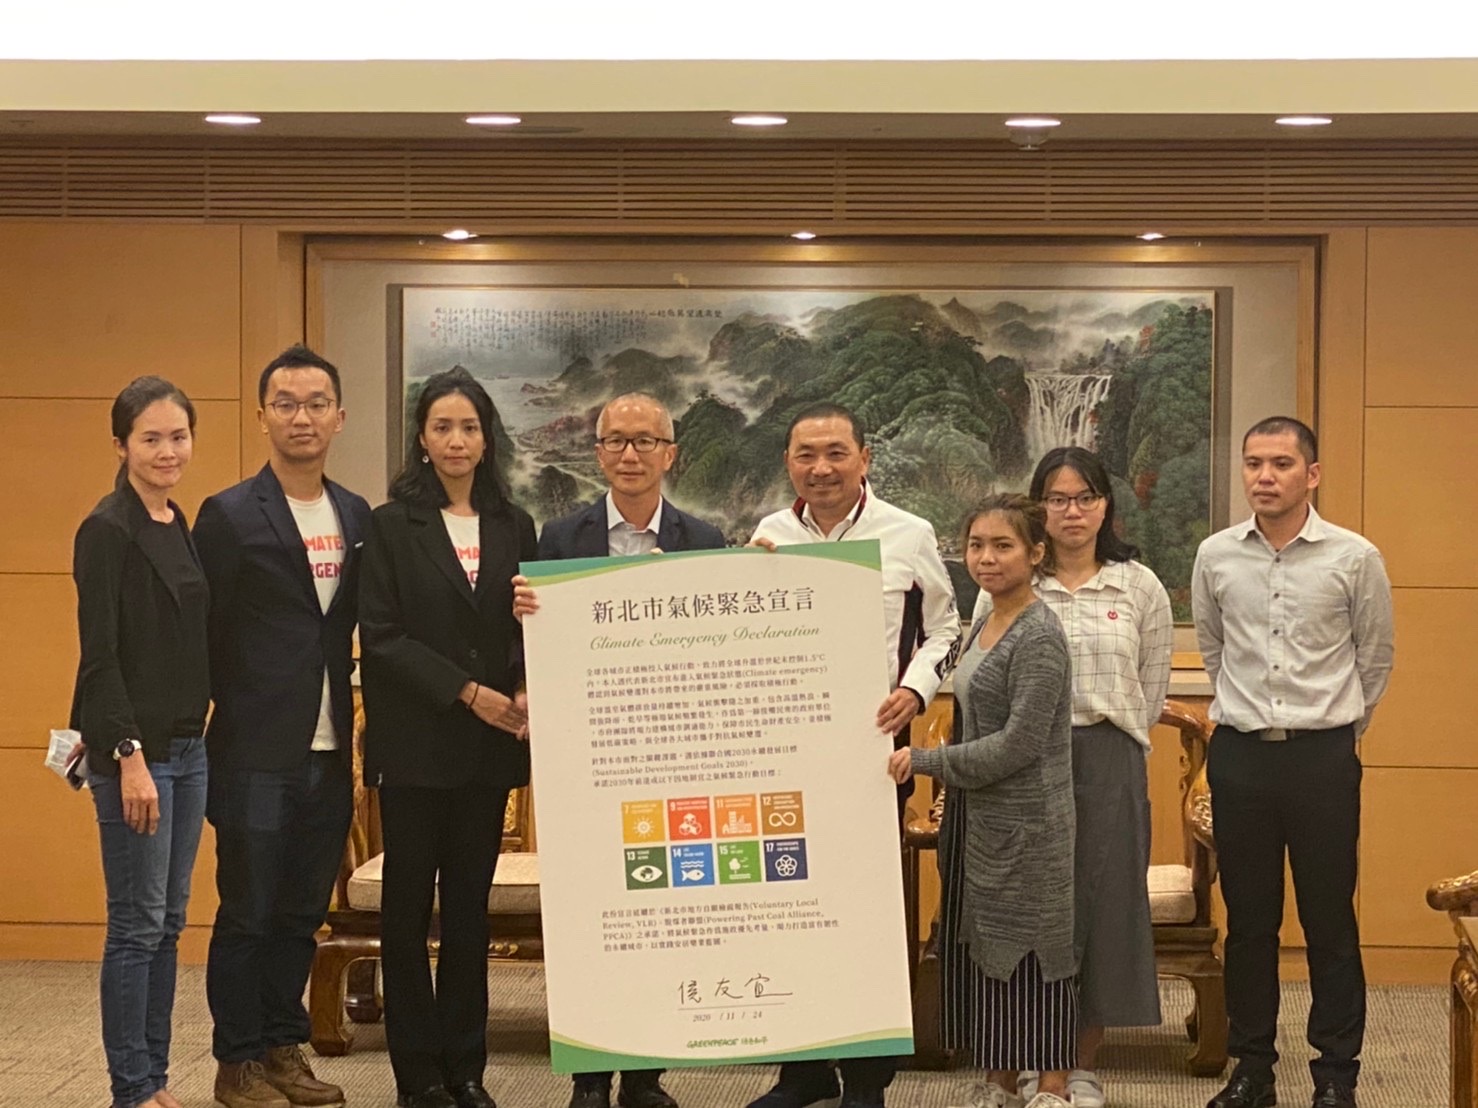 New Taipei as the pioneering city in Taiwan to sign the Climate Emergency Declaration